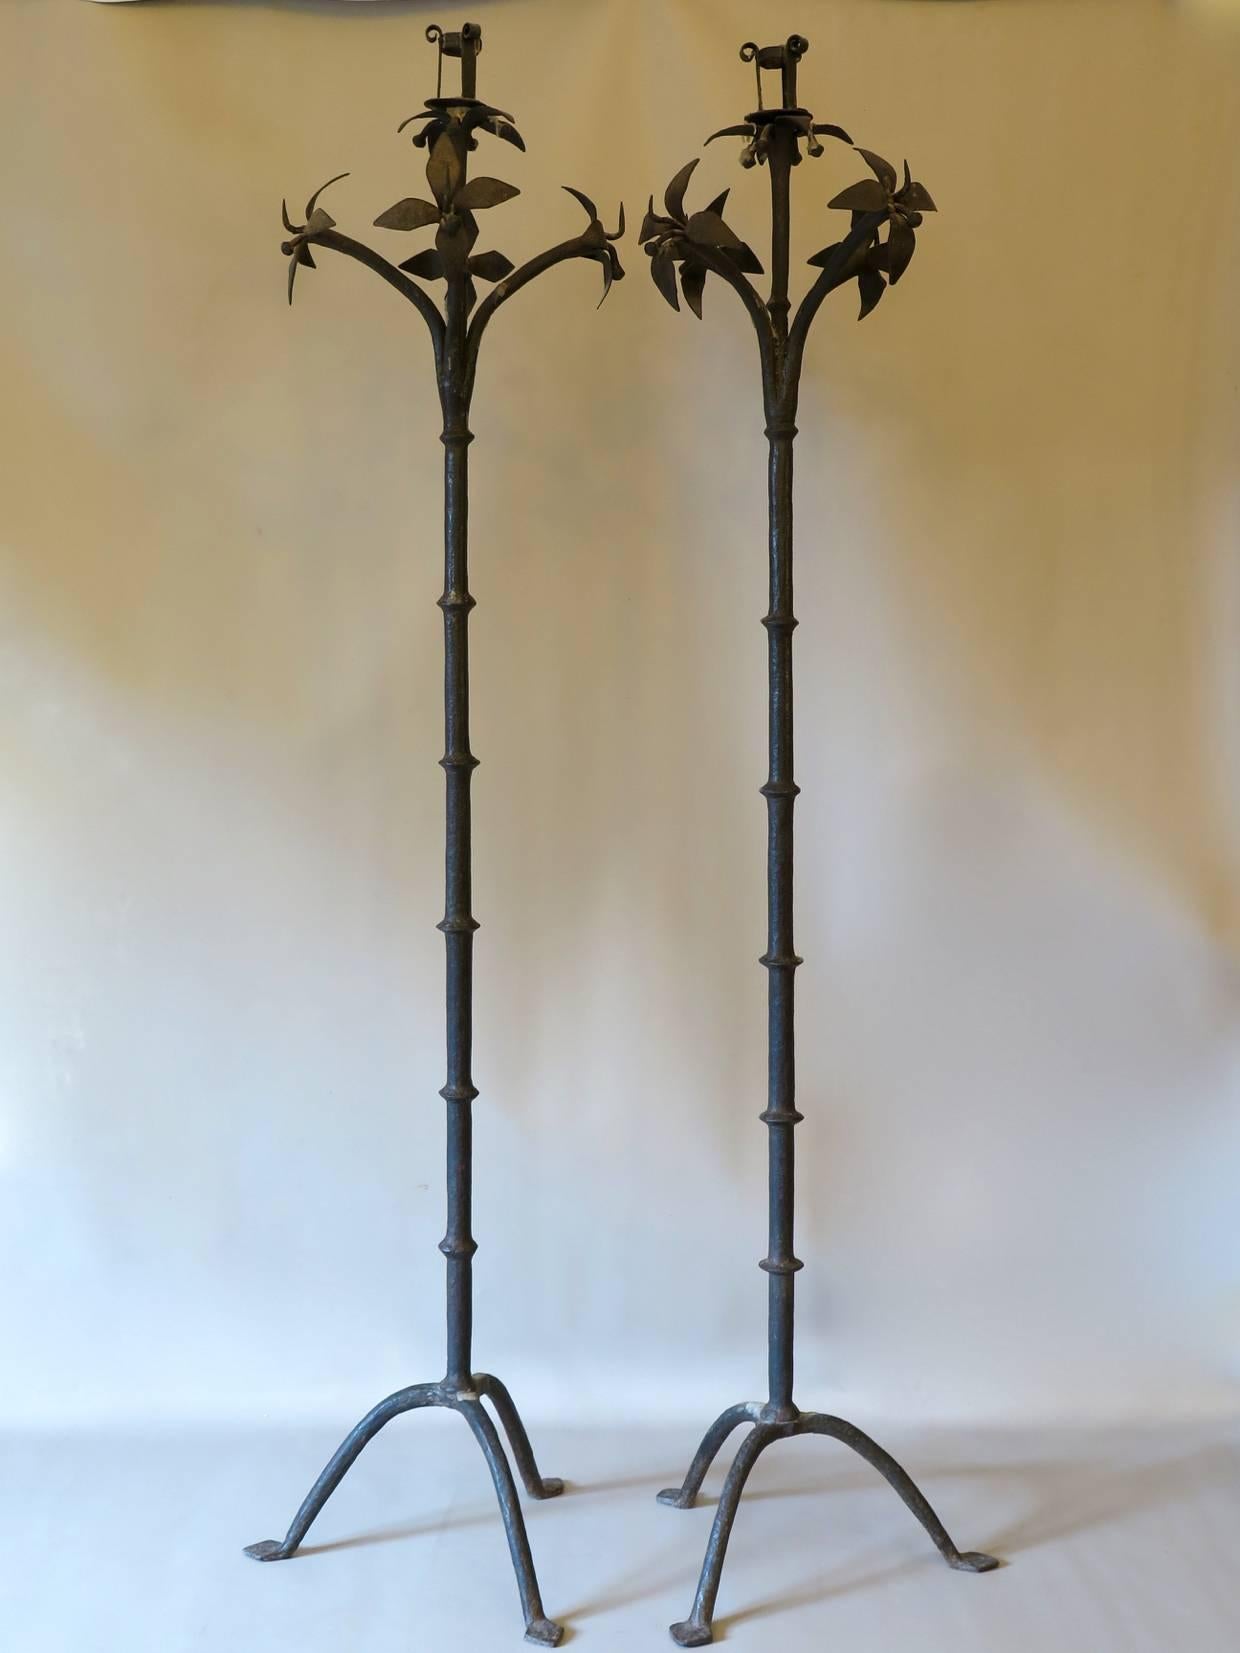 Elegant and rare pair of heavy wrought iron candleholders with a crown of flowers, raised on a tripod base.
Probably from Italy.